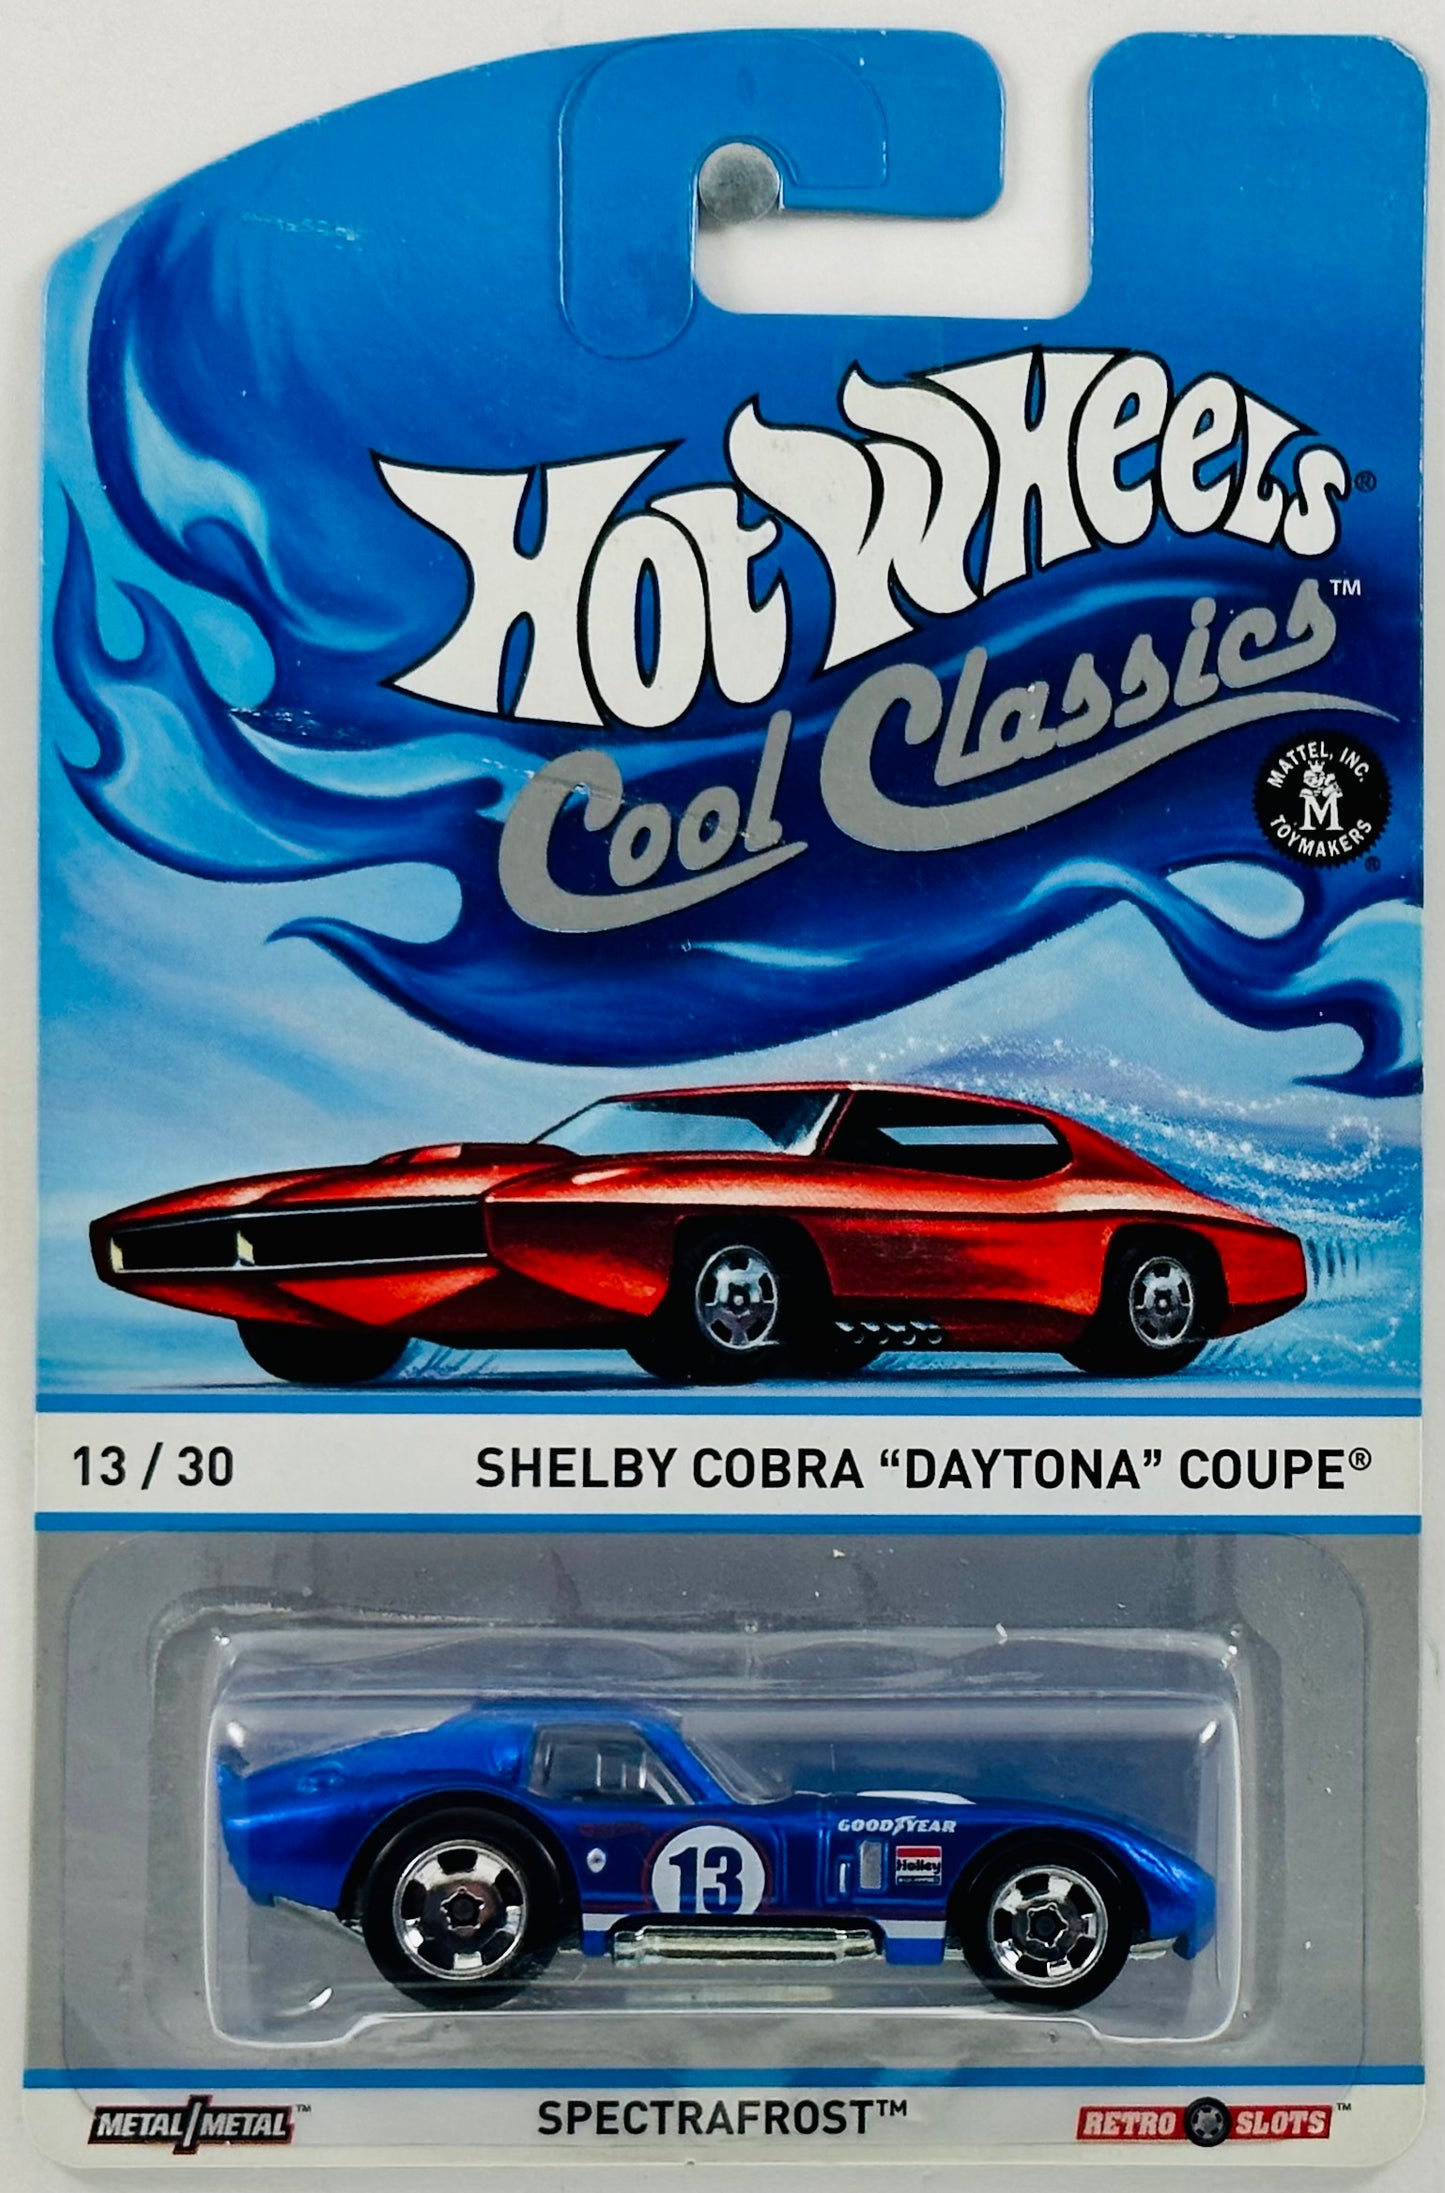 Hot Wheels 2013 - Cool Classics 13/30 - Shelby Cobra "Daytona" Coupe - Spectrafrost Blue - Metal/Metal & Retro Slots - Red Car Card